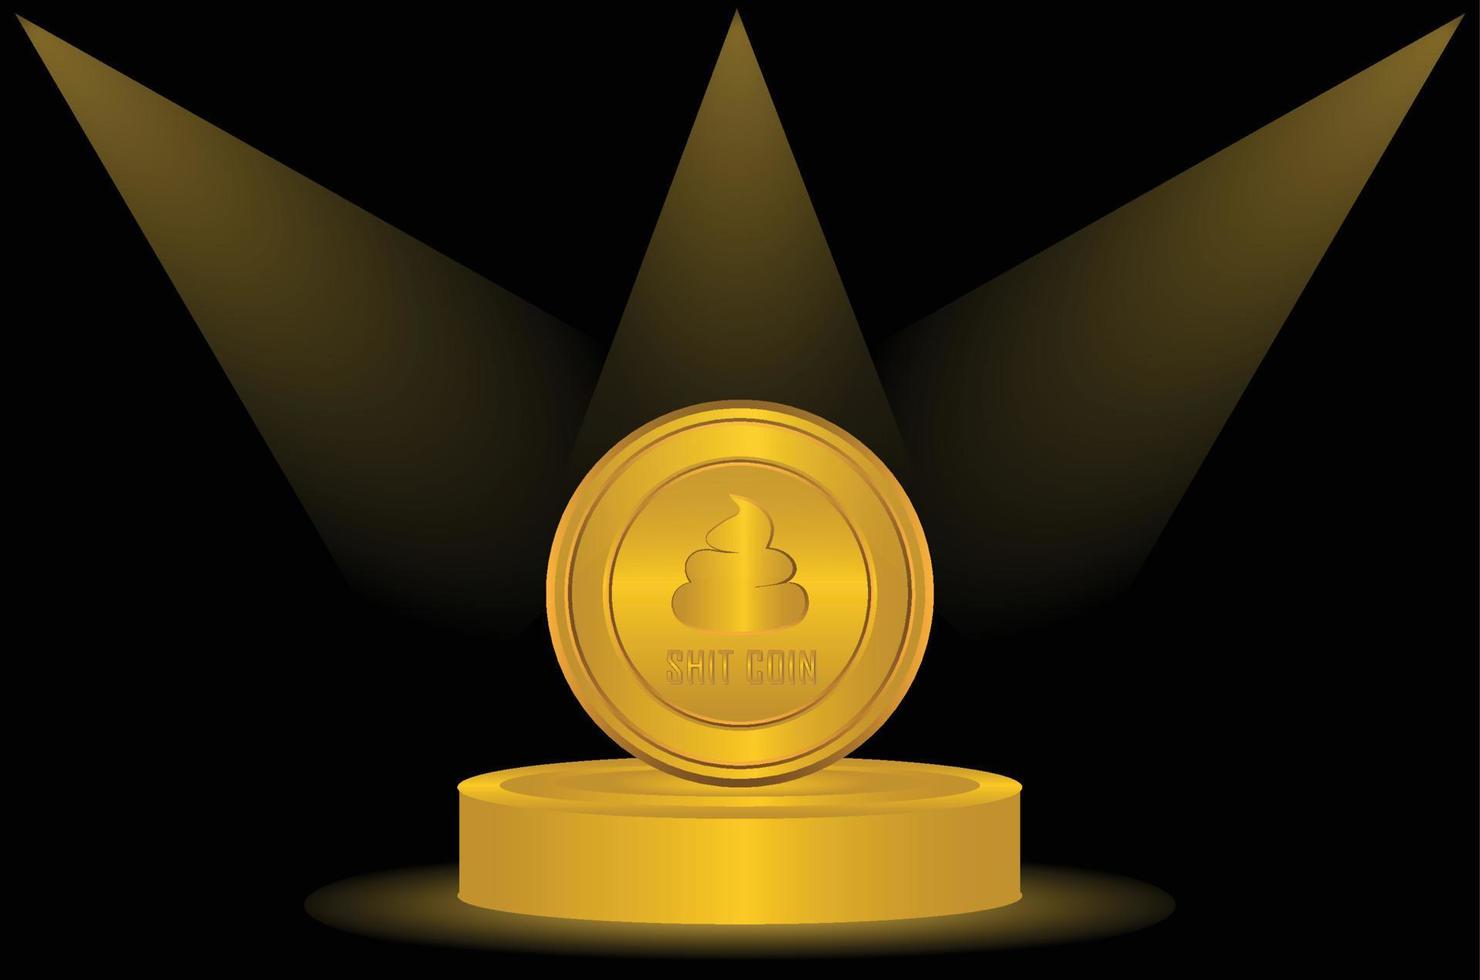 Shitcoin crypto currency on golden stage vector